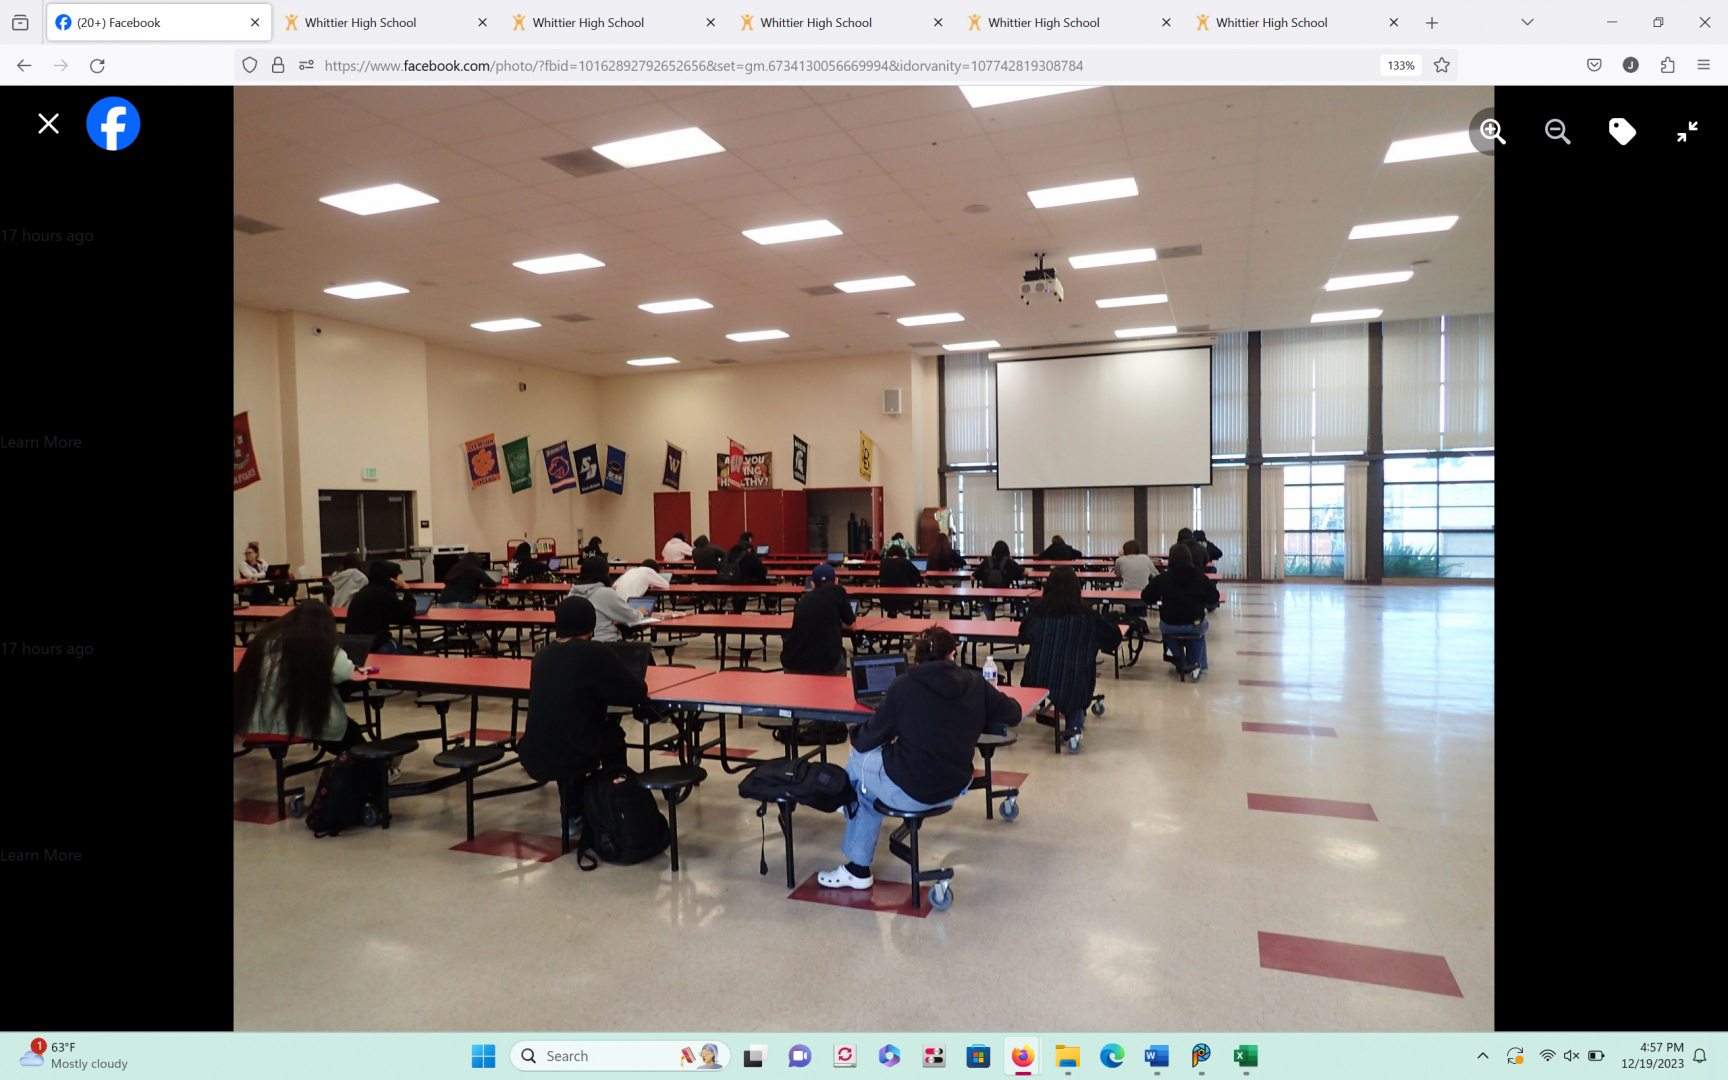 Here is another picture of the Saturday morning tour of Whittier HS.  This is the new cafeteria that I learned from John Peel was built of non flammable materials so it doesn'ts need fire sprinklers.